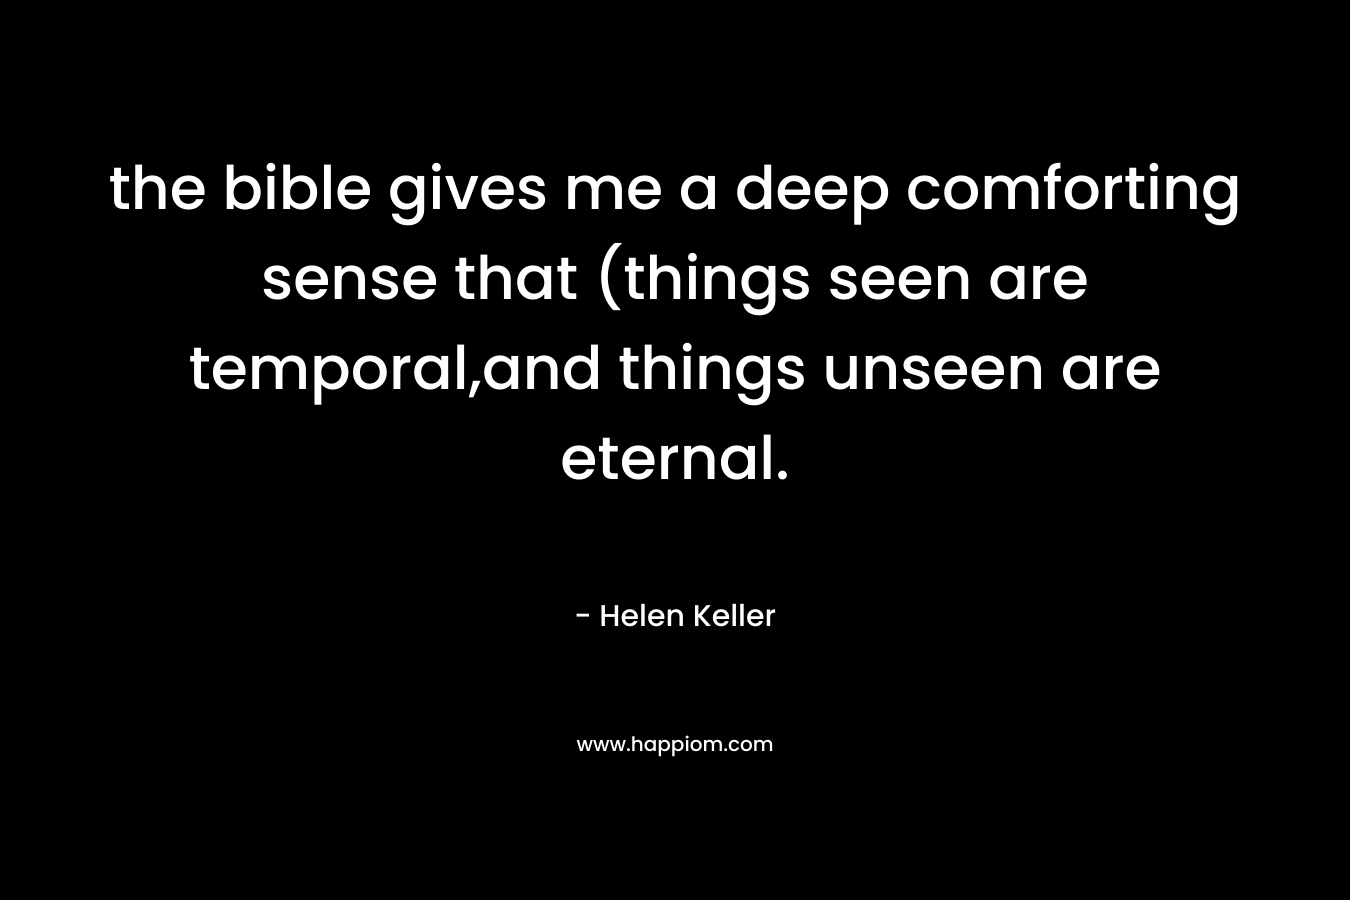 the bible gives me a deep comforting sense that (things seen are temporal,and things unseen are eternal.